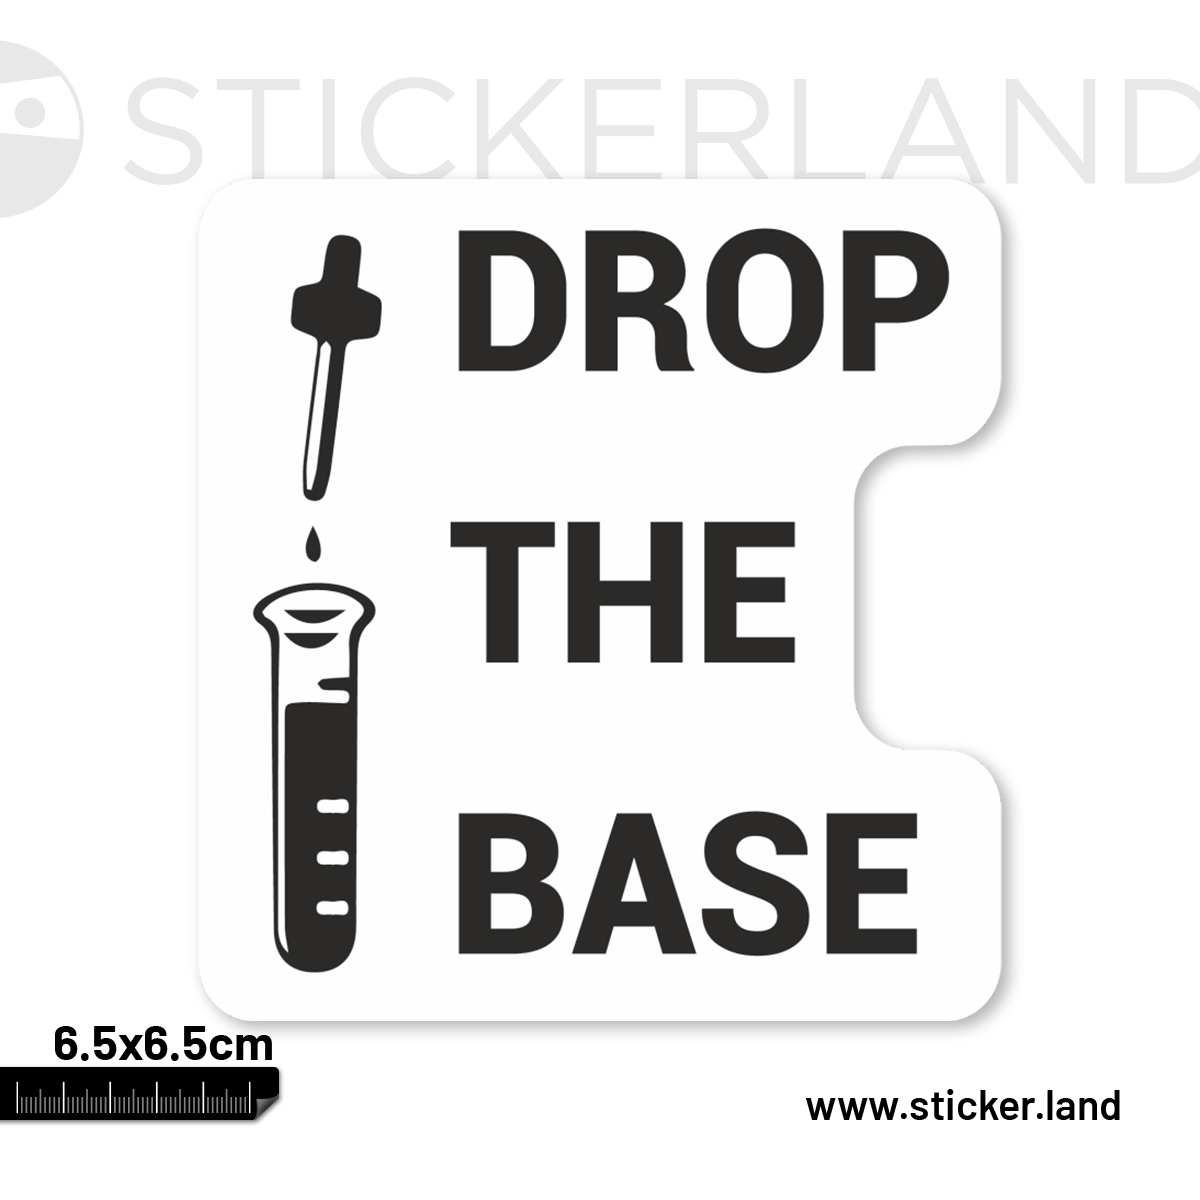 Get ready to drop the base and make some waves! 🎵🔊

Buy now: sticker.land/products/stick…

#stickerland #DropTheBase #MusicMagic #BeatDrops #PartyStarter #BassBoosted #Soundwaves #GetHyped